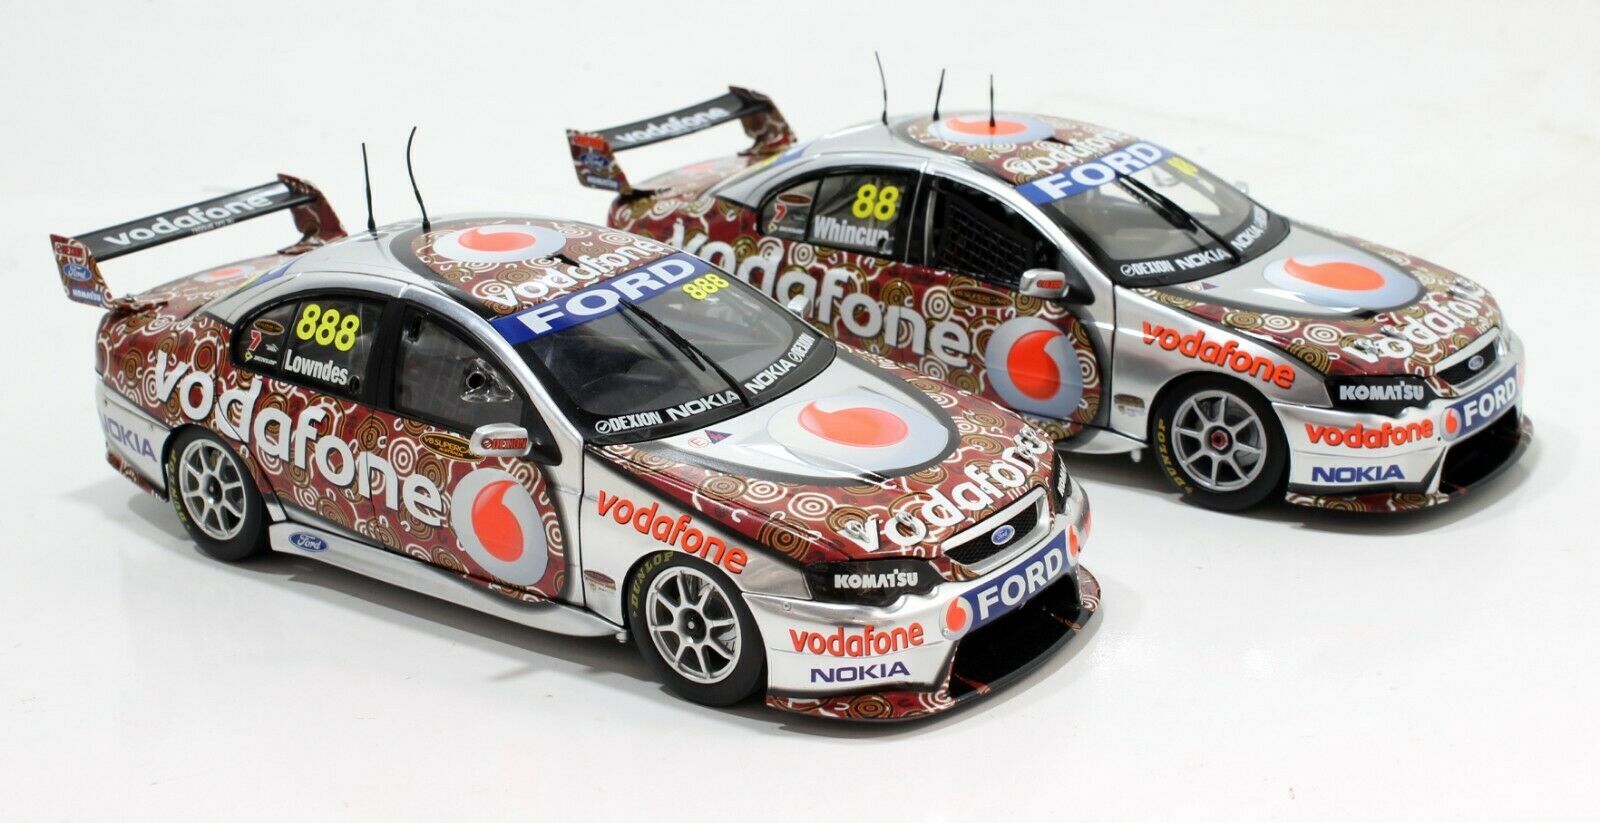 2008 JAMIE WHINCUP RED DUST DARWIN LIVERY VODAFONE 1:18 DIE CAST MODEL CAR 